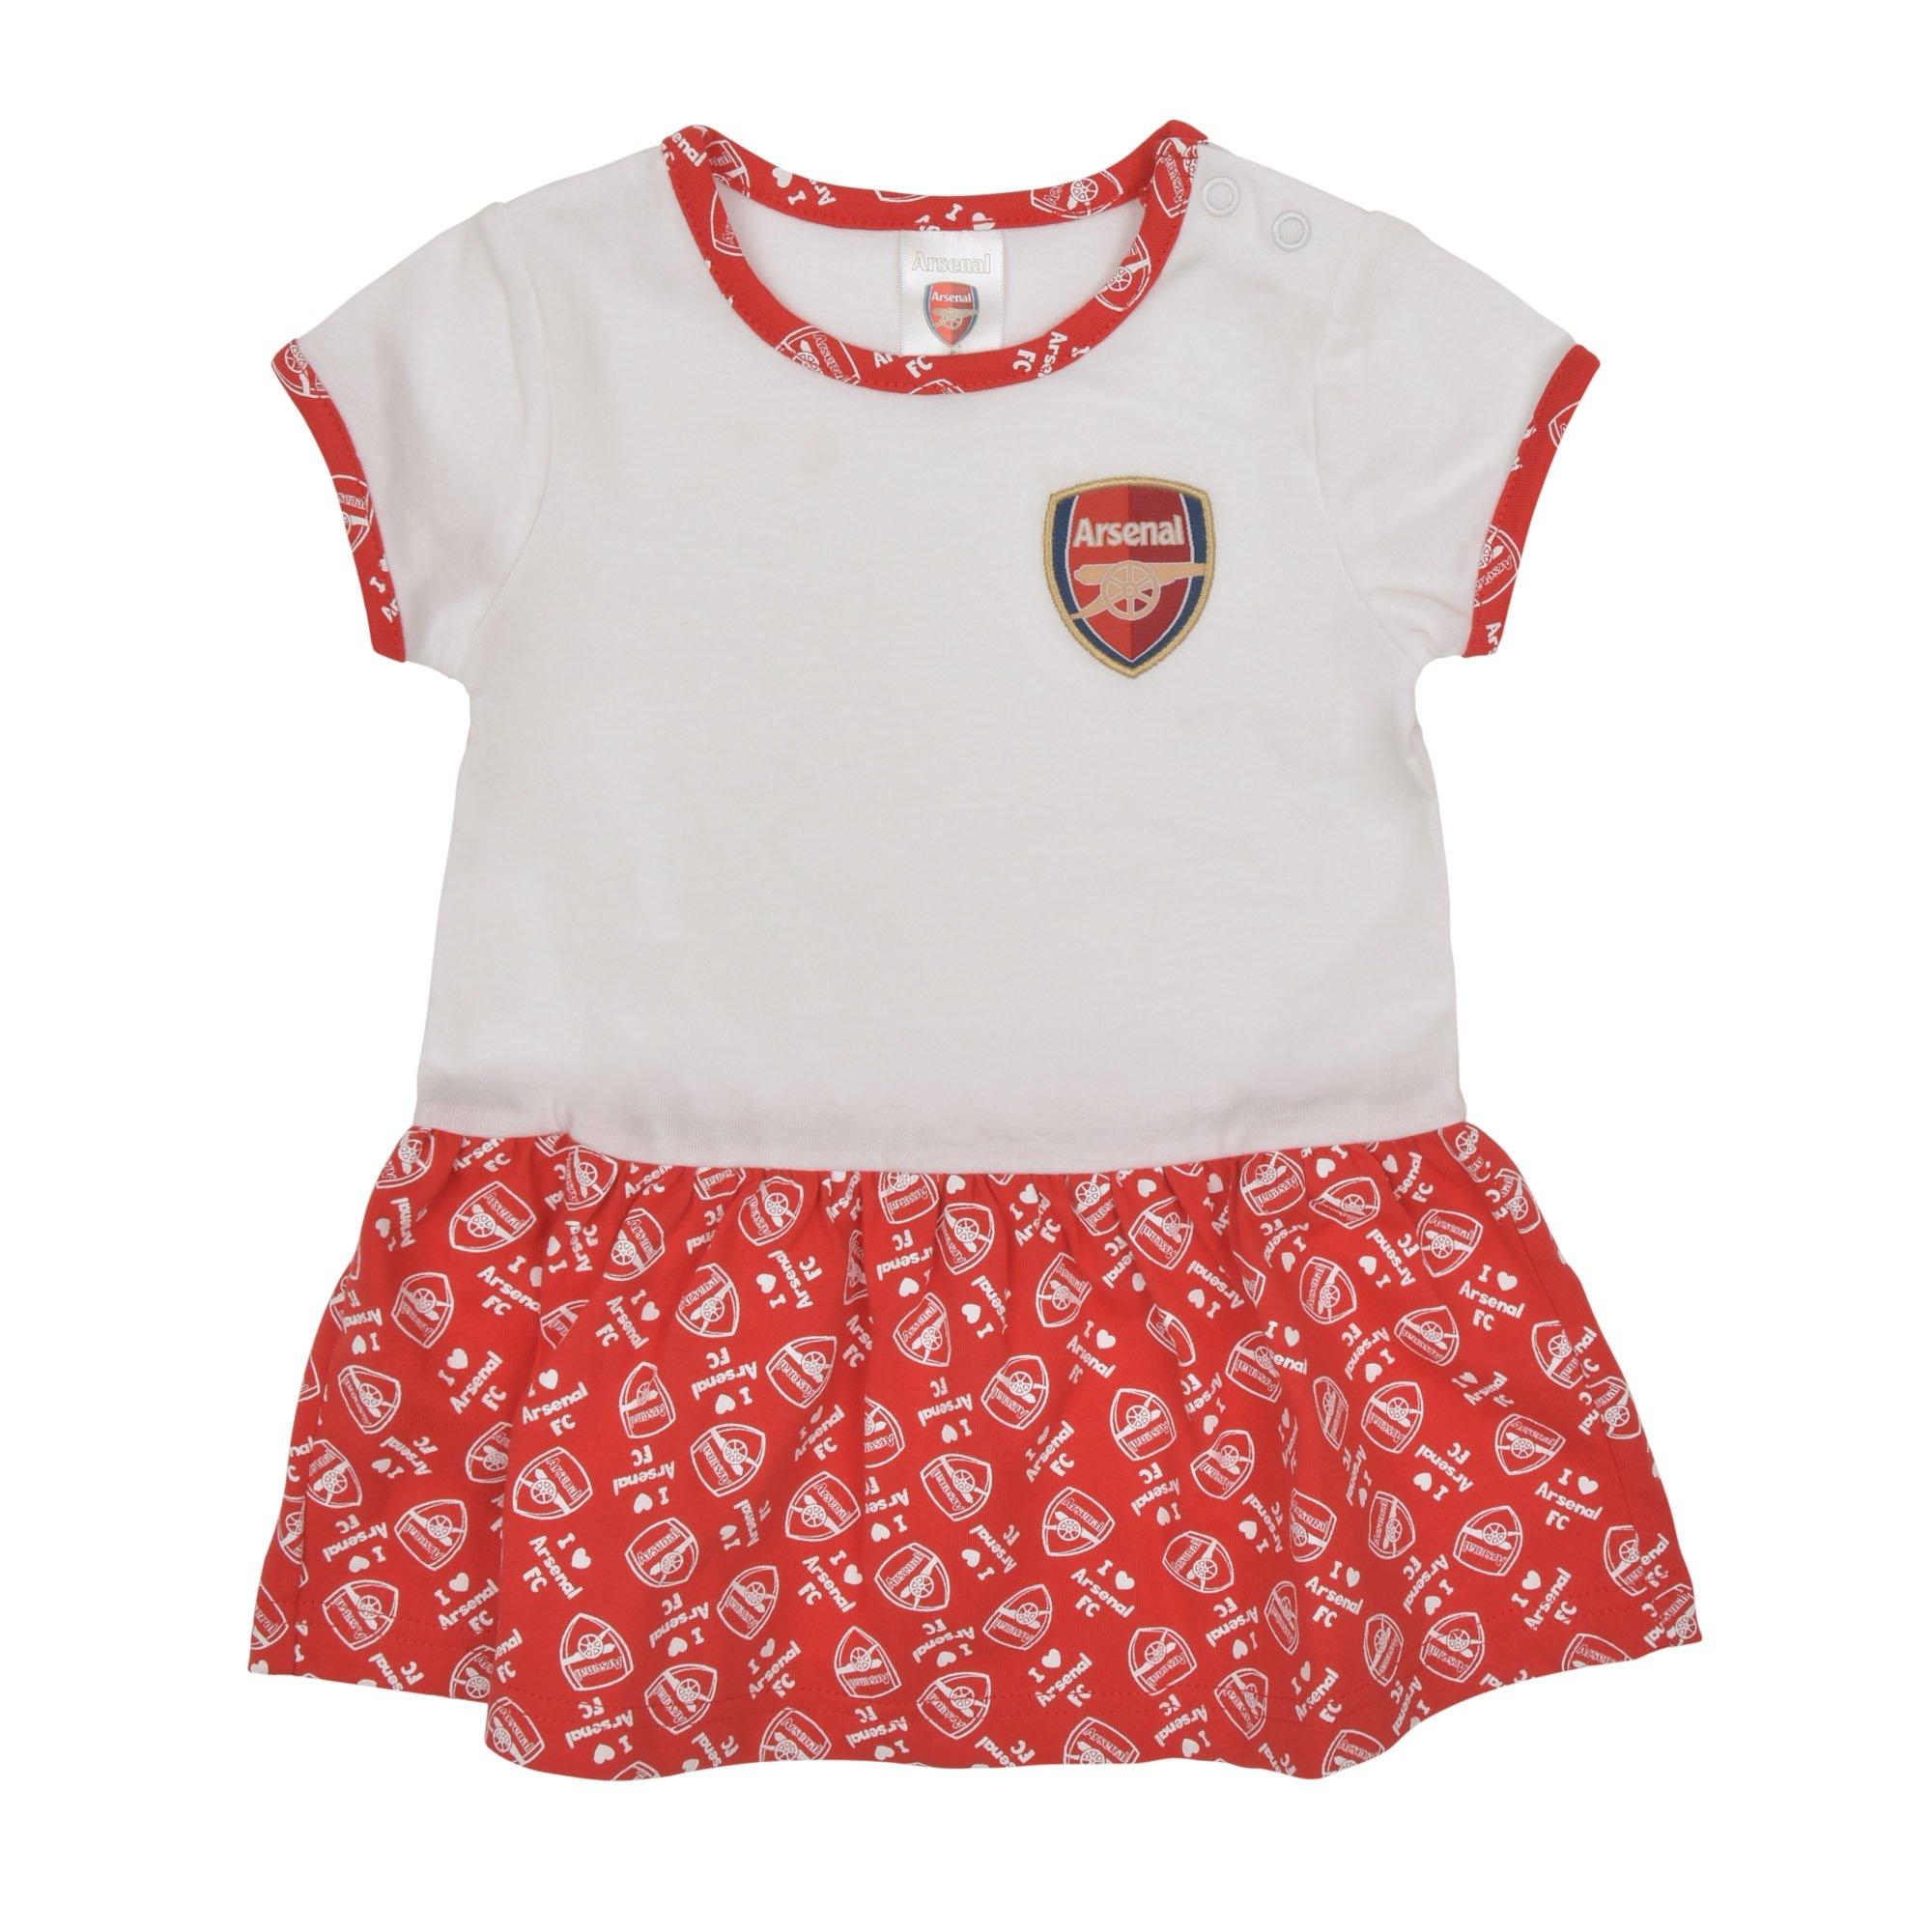 Arsenal Baby Crest Dress | Official 